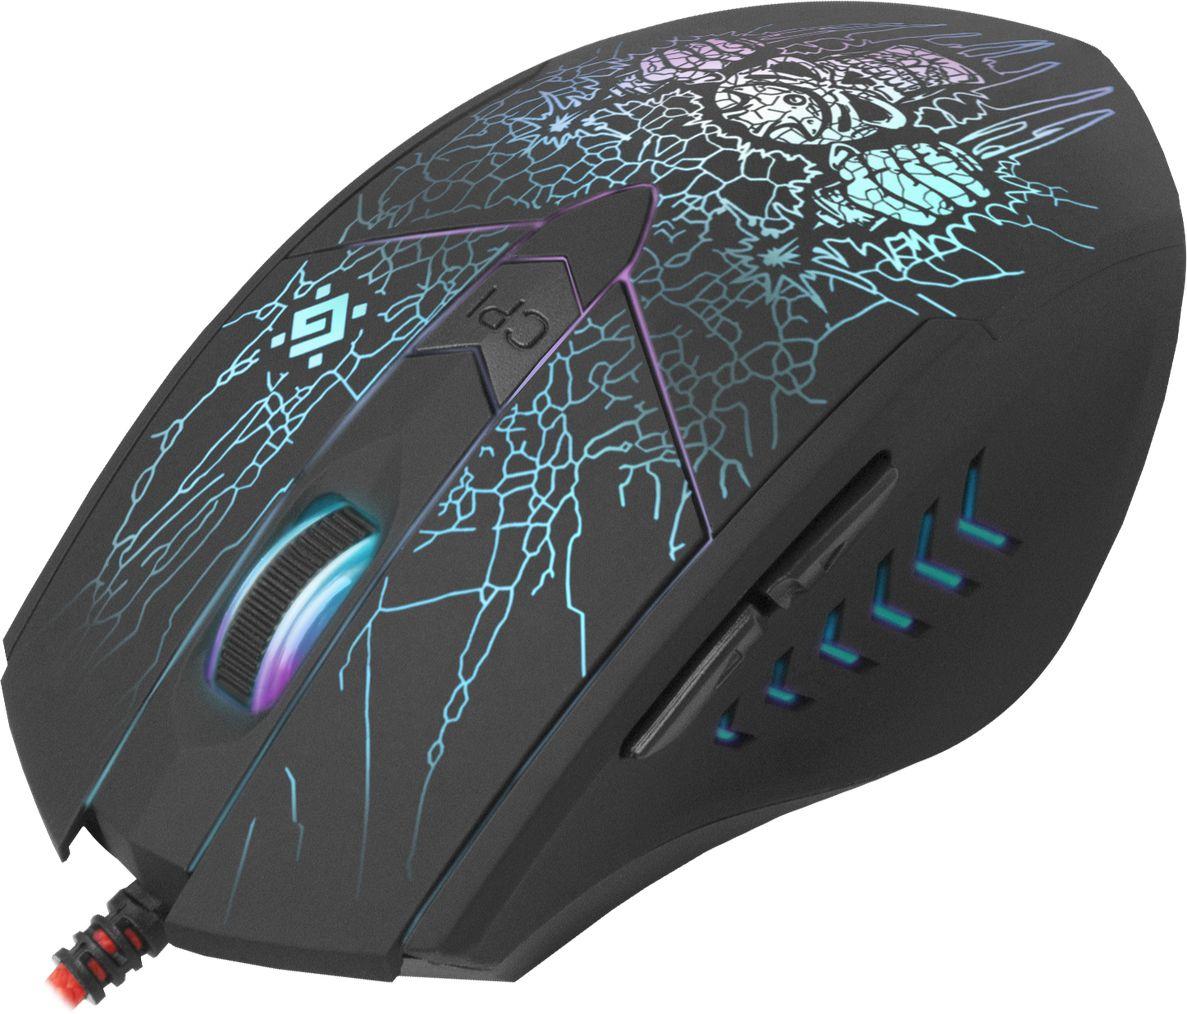 Defender Doom Fighter GM-260L mouse USB Type-A Optical 3200 DPI Ambidextrous